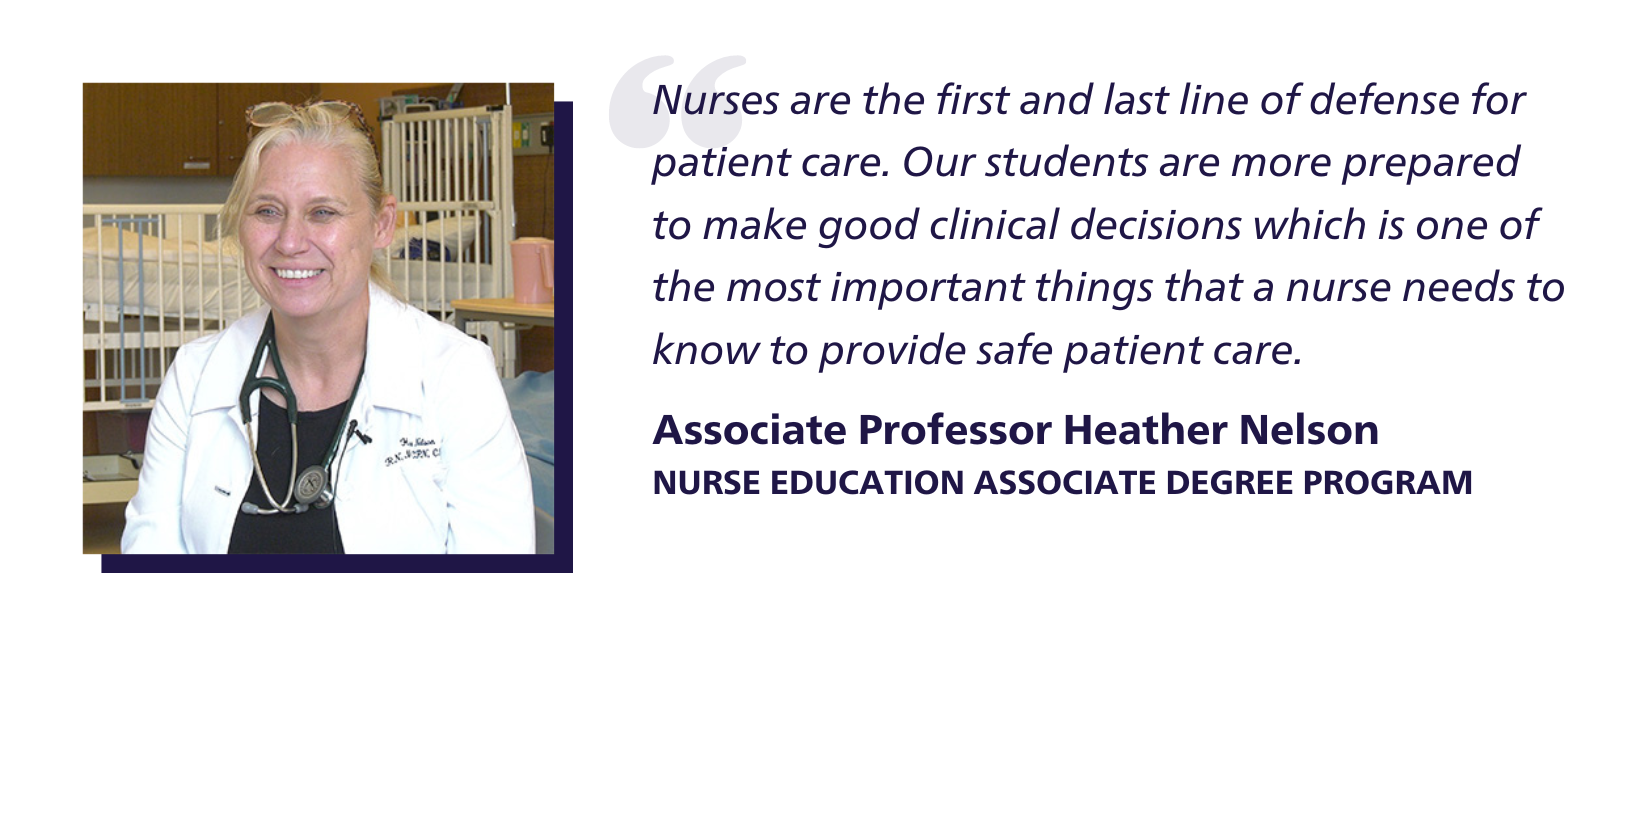 Quote: Nurses are the first and last line of defense for patient care. Our students are more prepared to make good clinical decisions which is one of the most important things that a nurse needs to know to provide safe patient care. Associate Professor Heather Nelson, Nurse Education Associate Degree Program